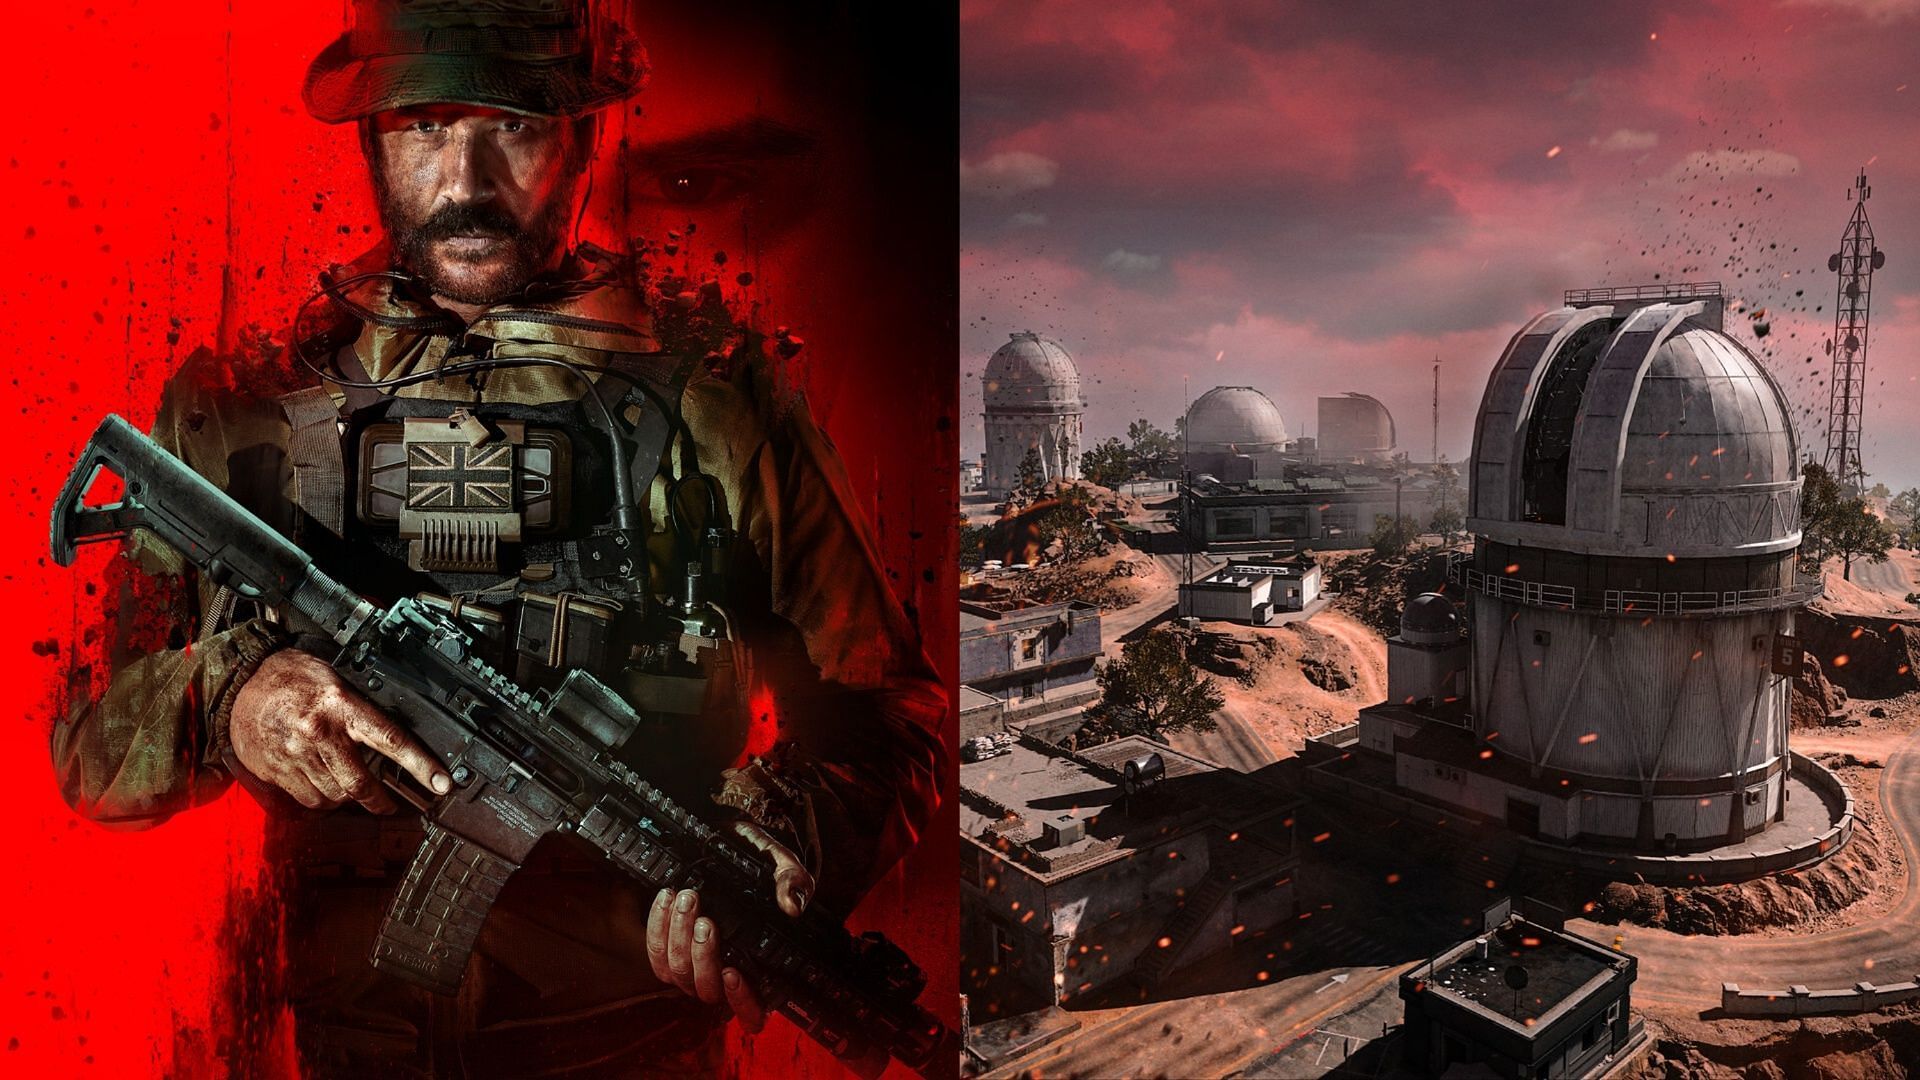 Captain Price from MW3 on the left and Shadow Siege Event in Al Mazrah on the right.